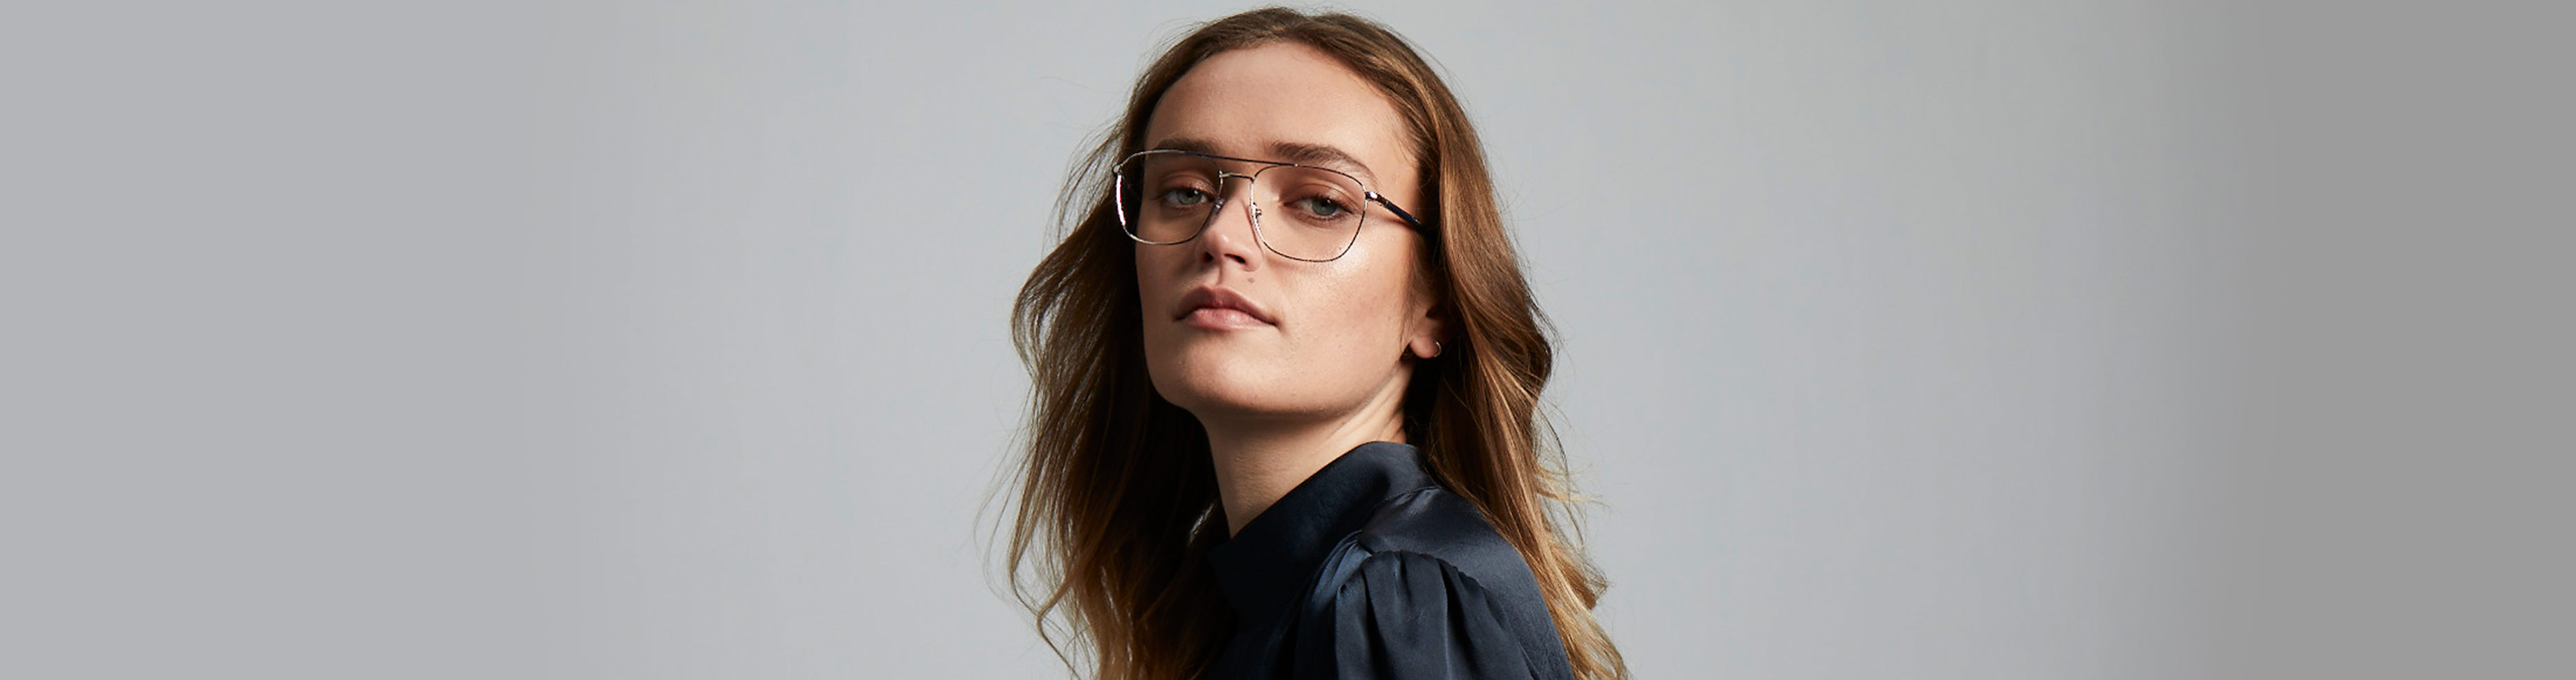 Get Wired: A fashion-focused look on wire frames through the ages